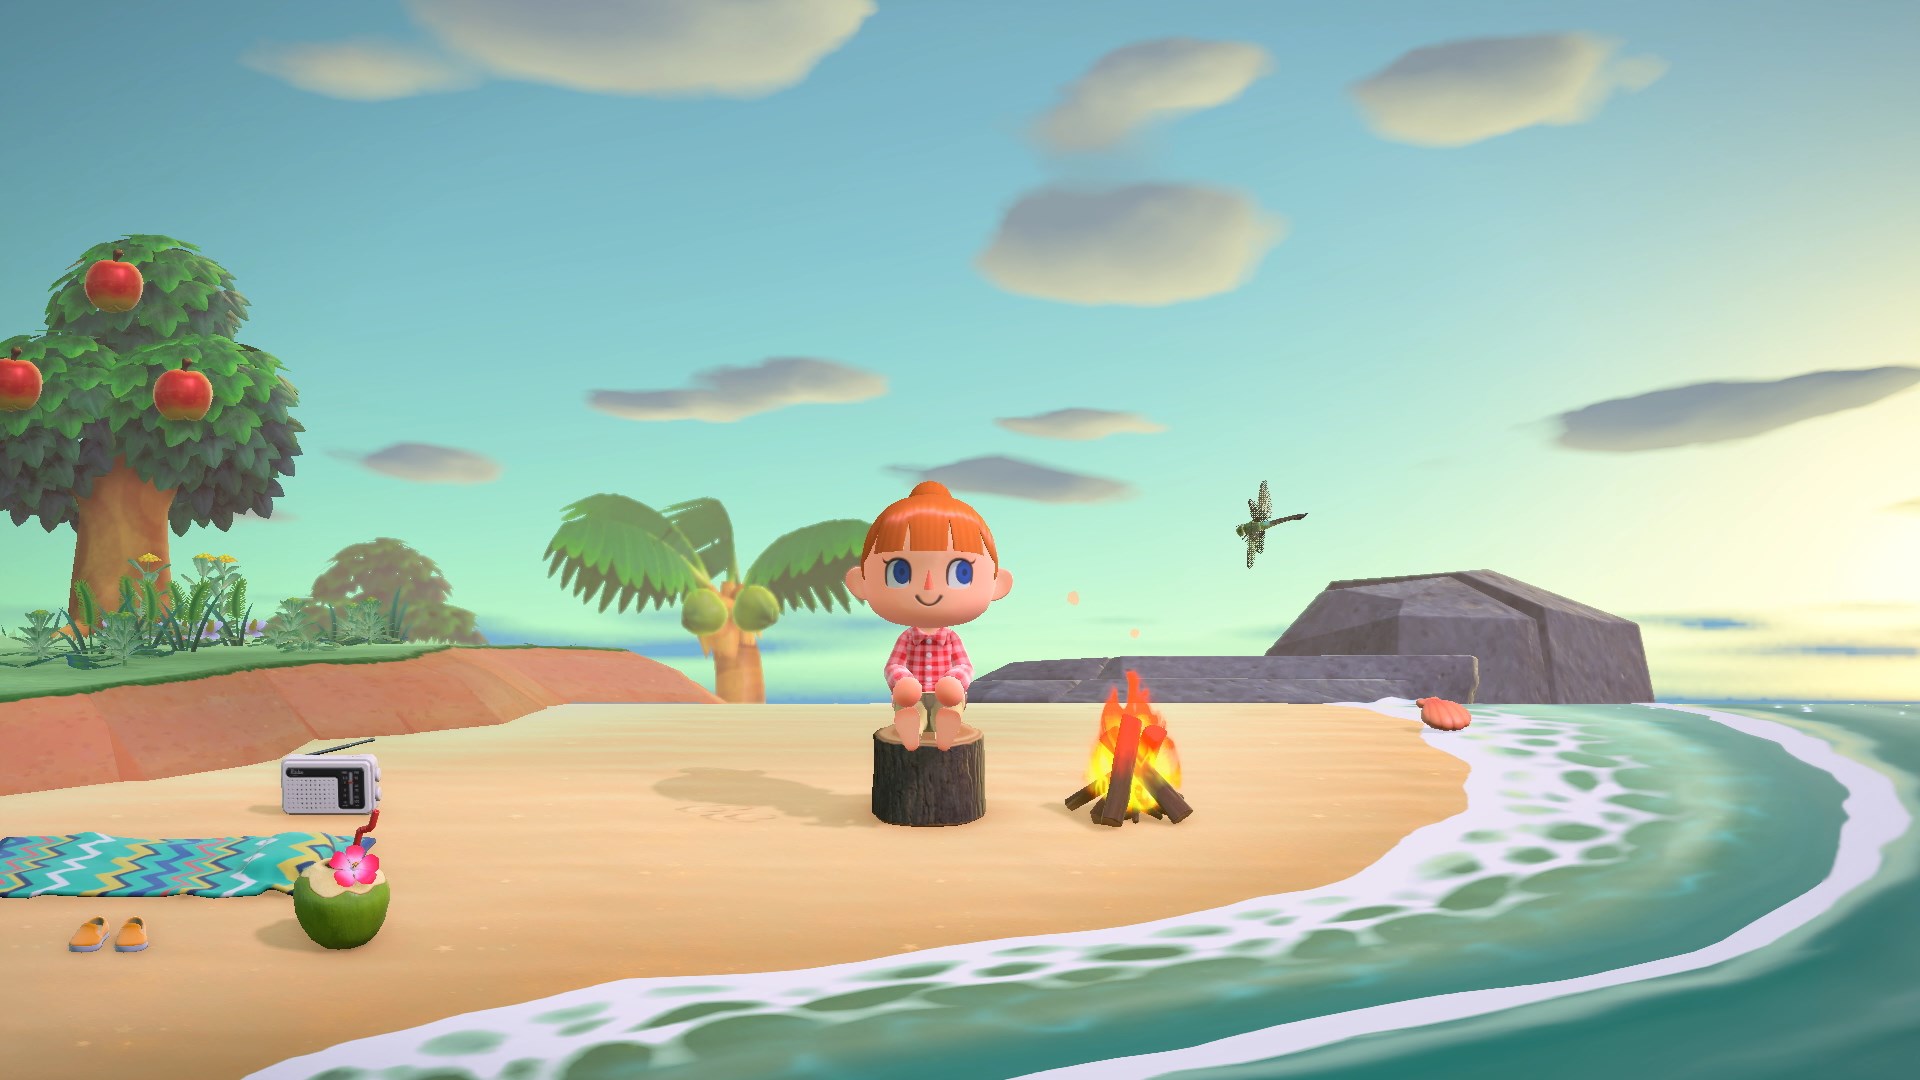 A beach scene from Animal Crossing: New Horizons for Nintendo Switch